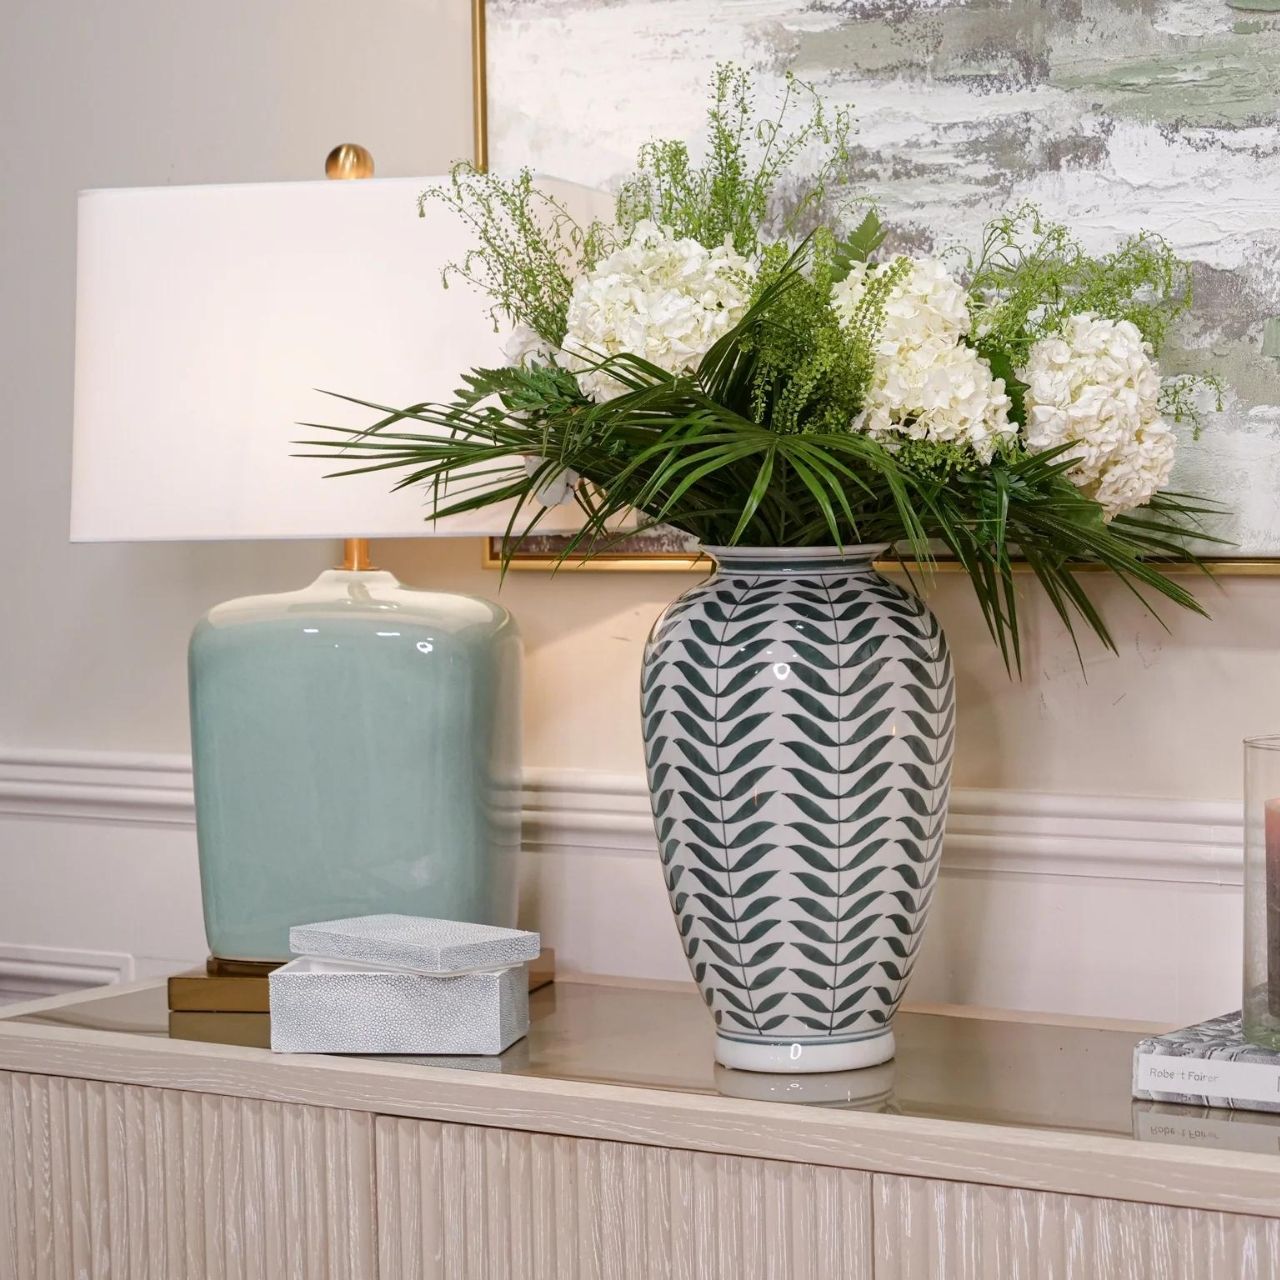 Leaf Vase by Mindy Brownes  This gorgeous ceramic decorative vase will add a delicate pop of colour to your home. The calming colour pallet with it's off white base and green leaf pattern will make this the perfect spring home accessory.